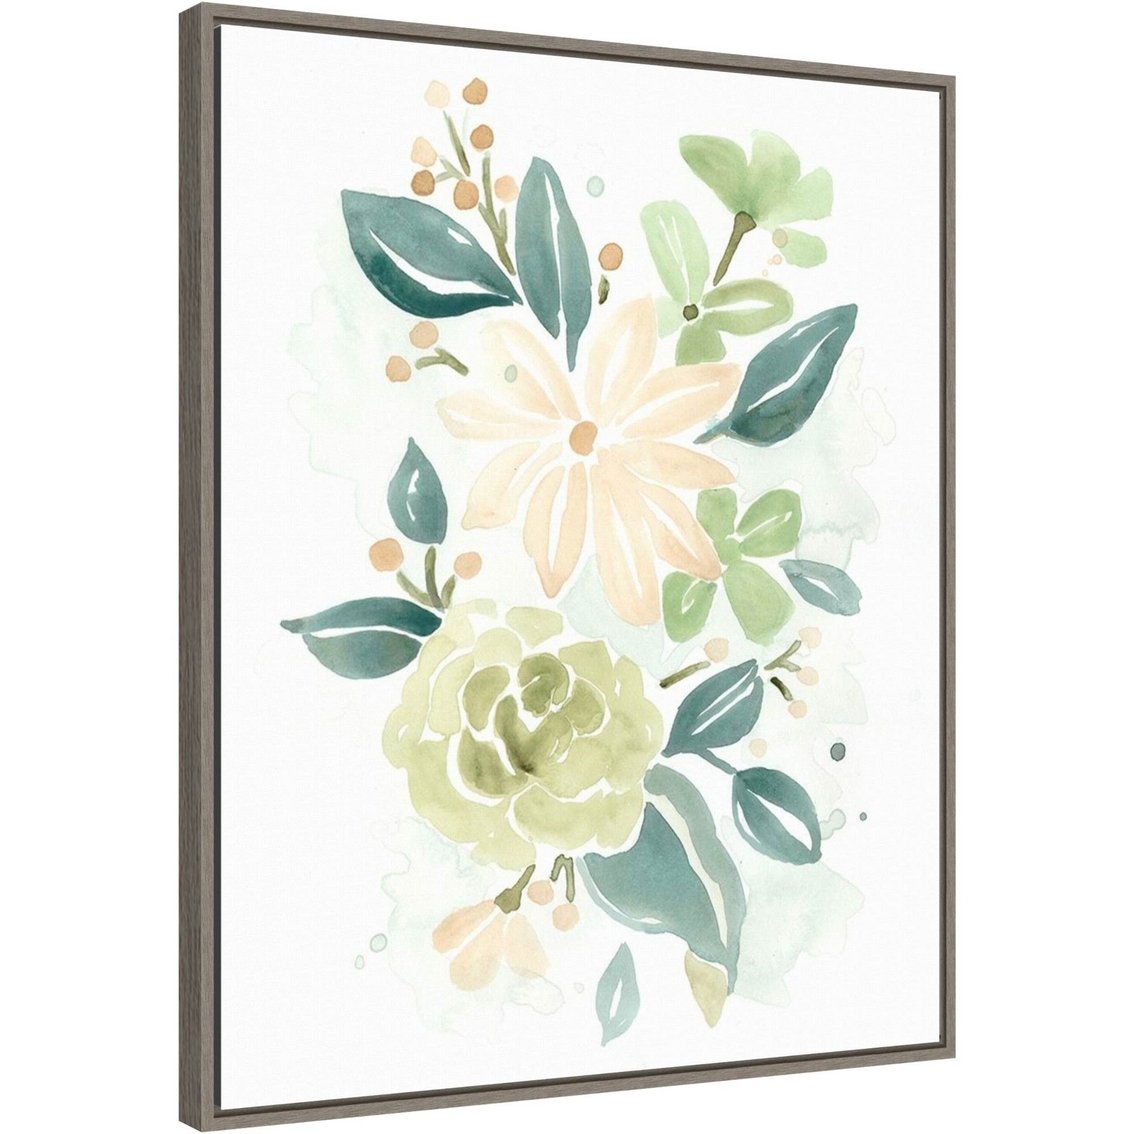 Amanti Art Spring Greens II 22.5 x 27.75 in. Framed Canvas Wall Art - Image 2 of 7